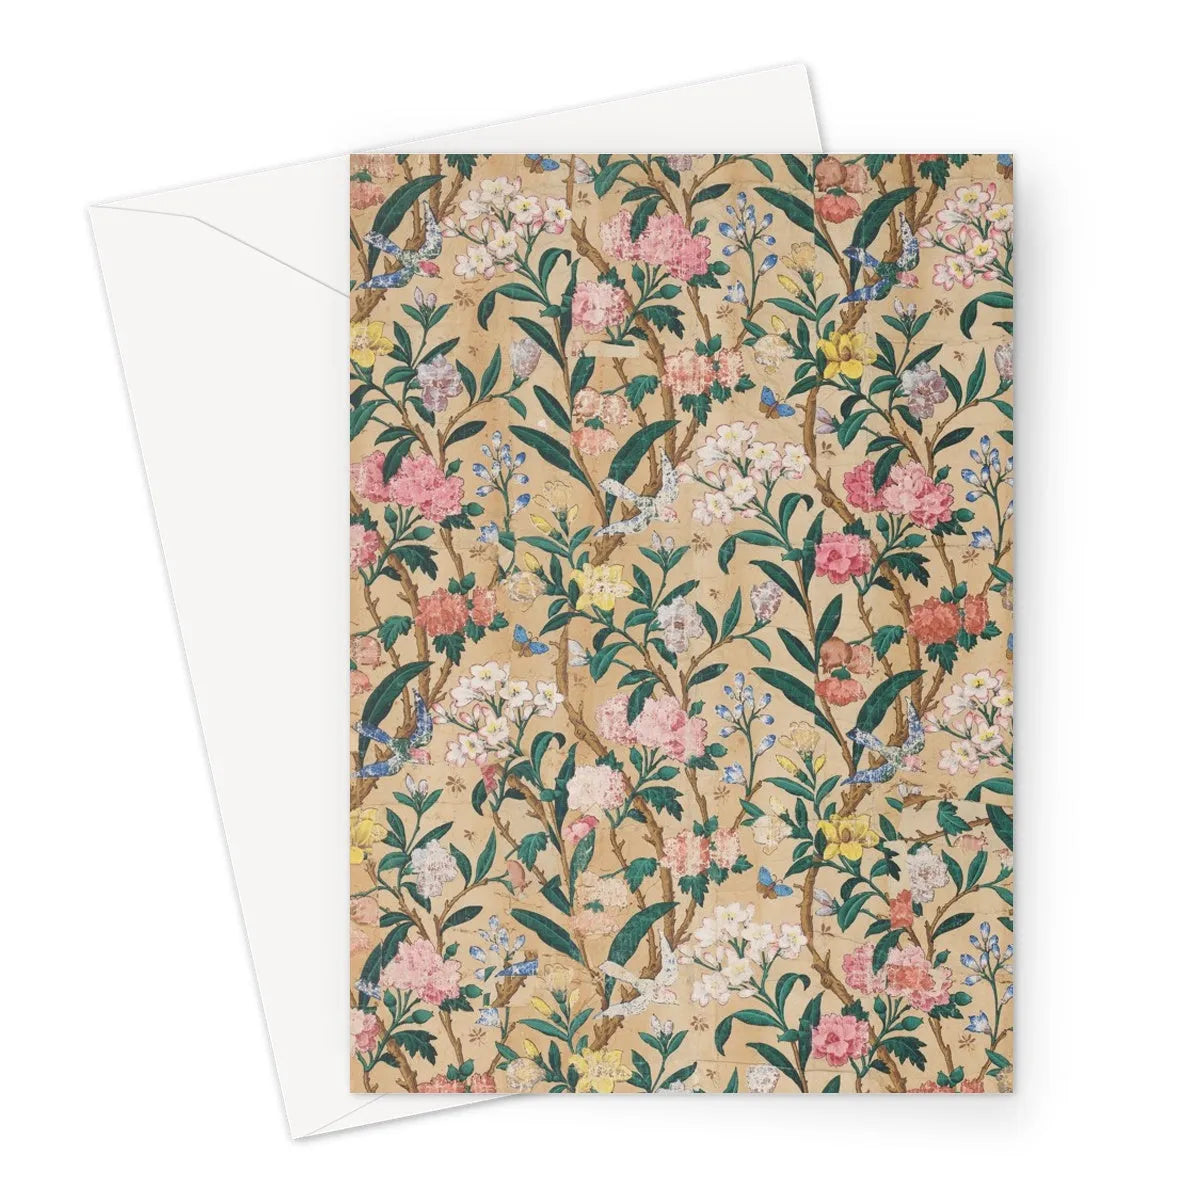 Birds Butterflies Bees And Blossoms Greeting Card - A5 Portrait / 1 Card - Notebooks & Notepads - Aesthetic Art